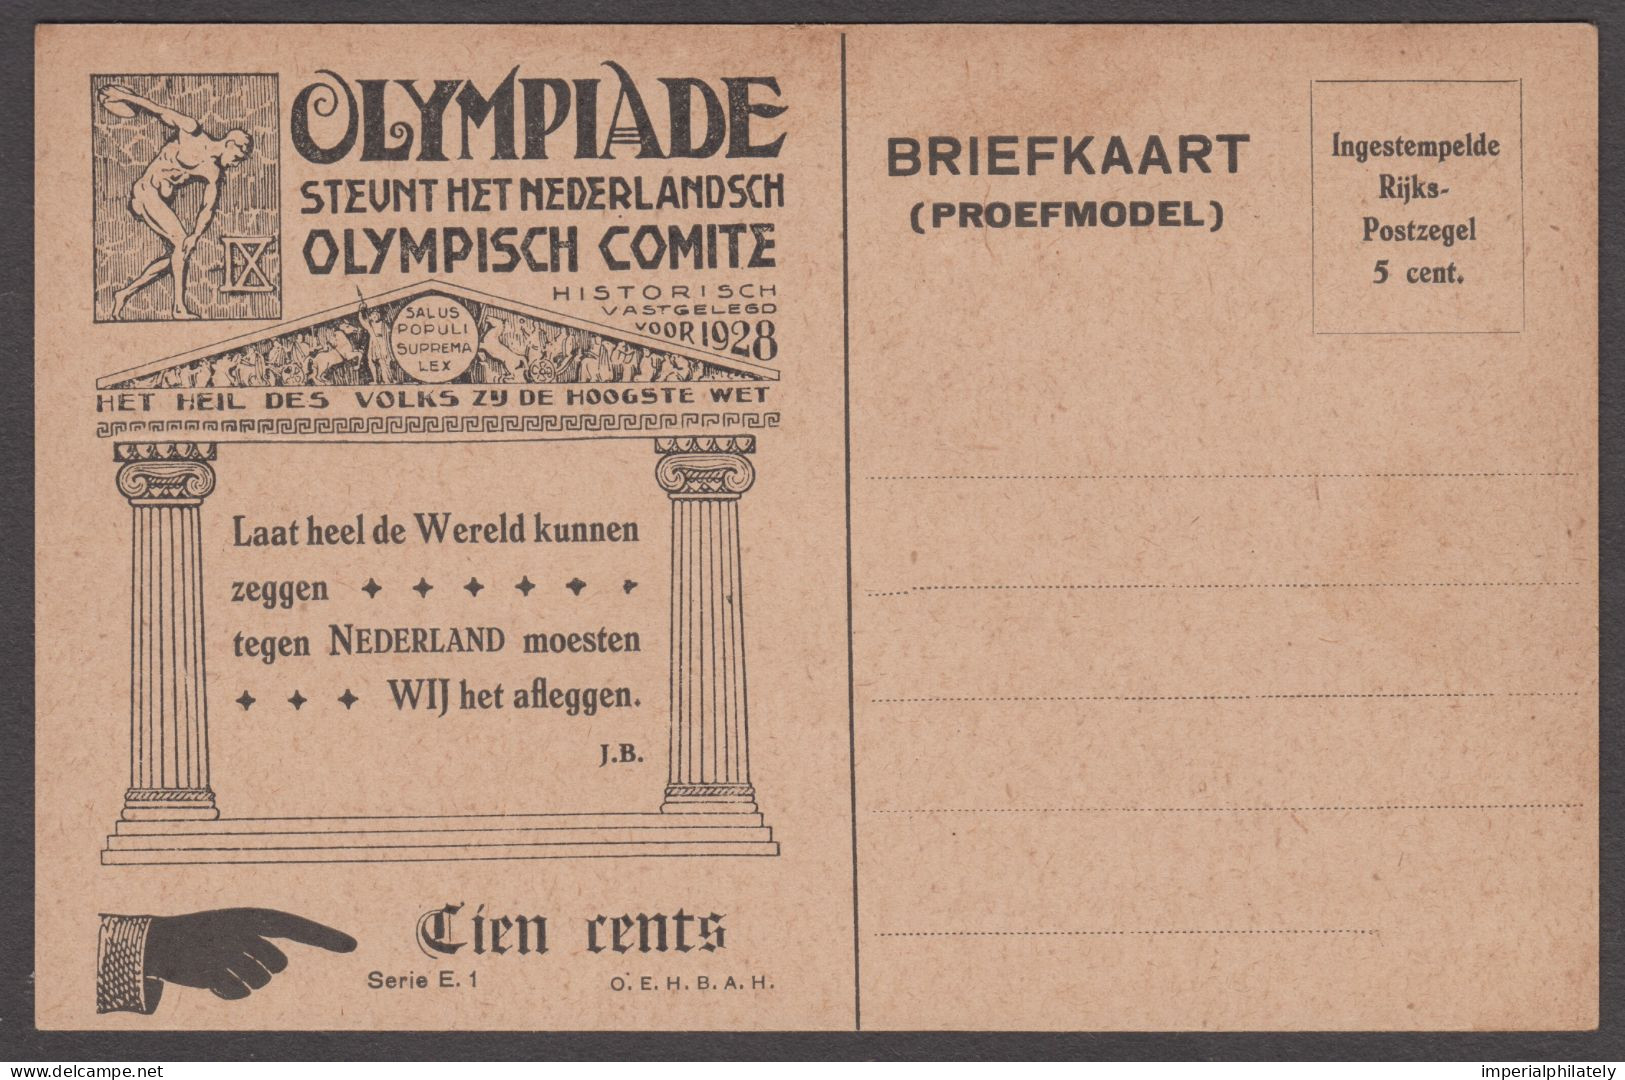 1928 Amsterdam 5c Postal Stationery Card Proof ("proefmodel") By Huygens, Series E.1 - Summer 1928: Amsterdam